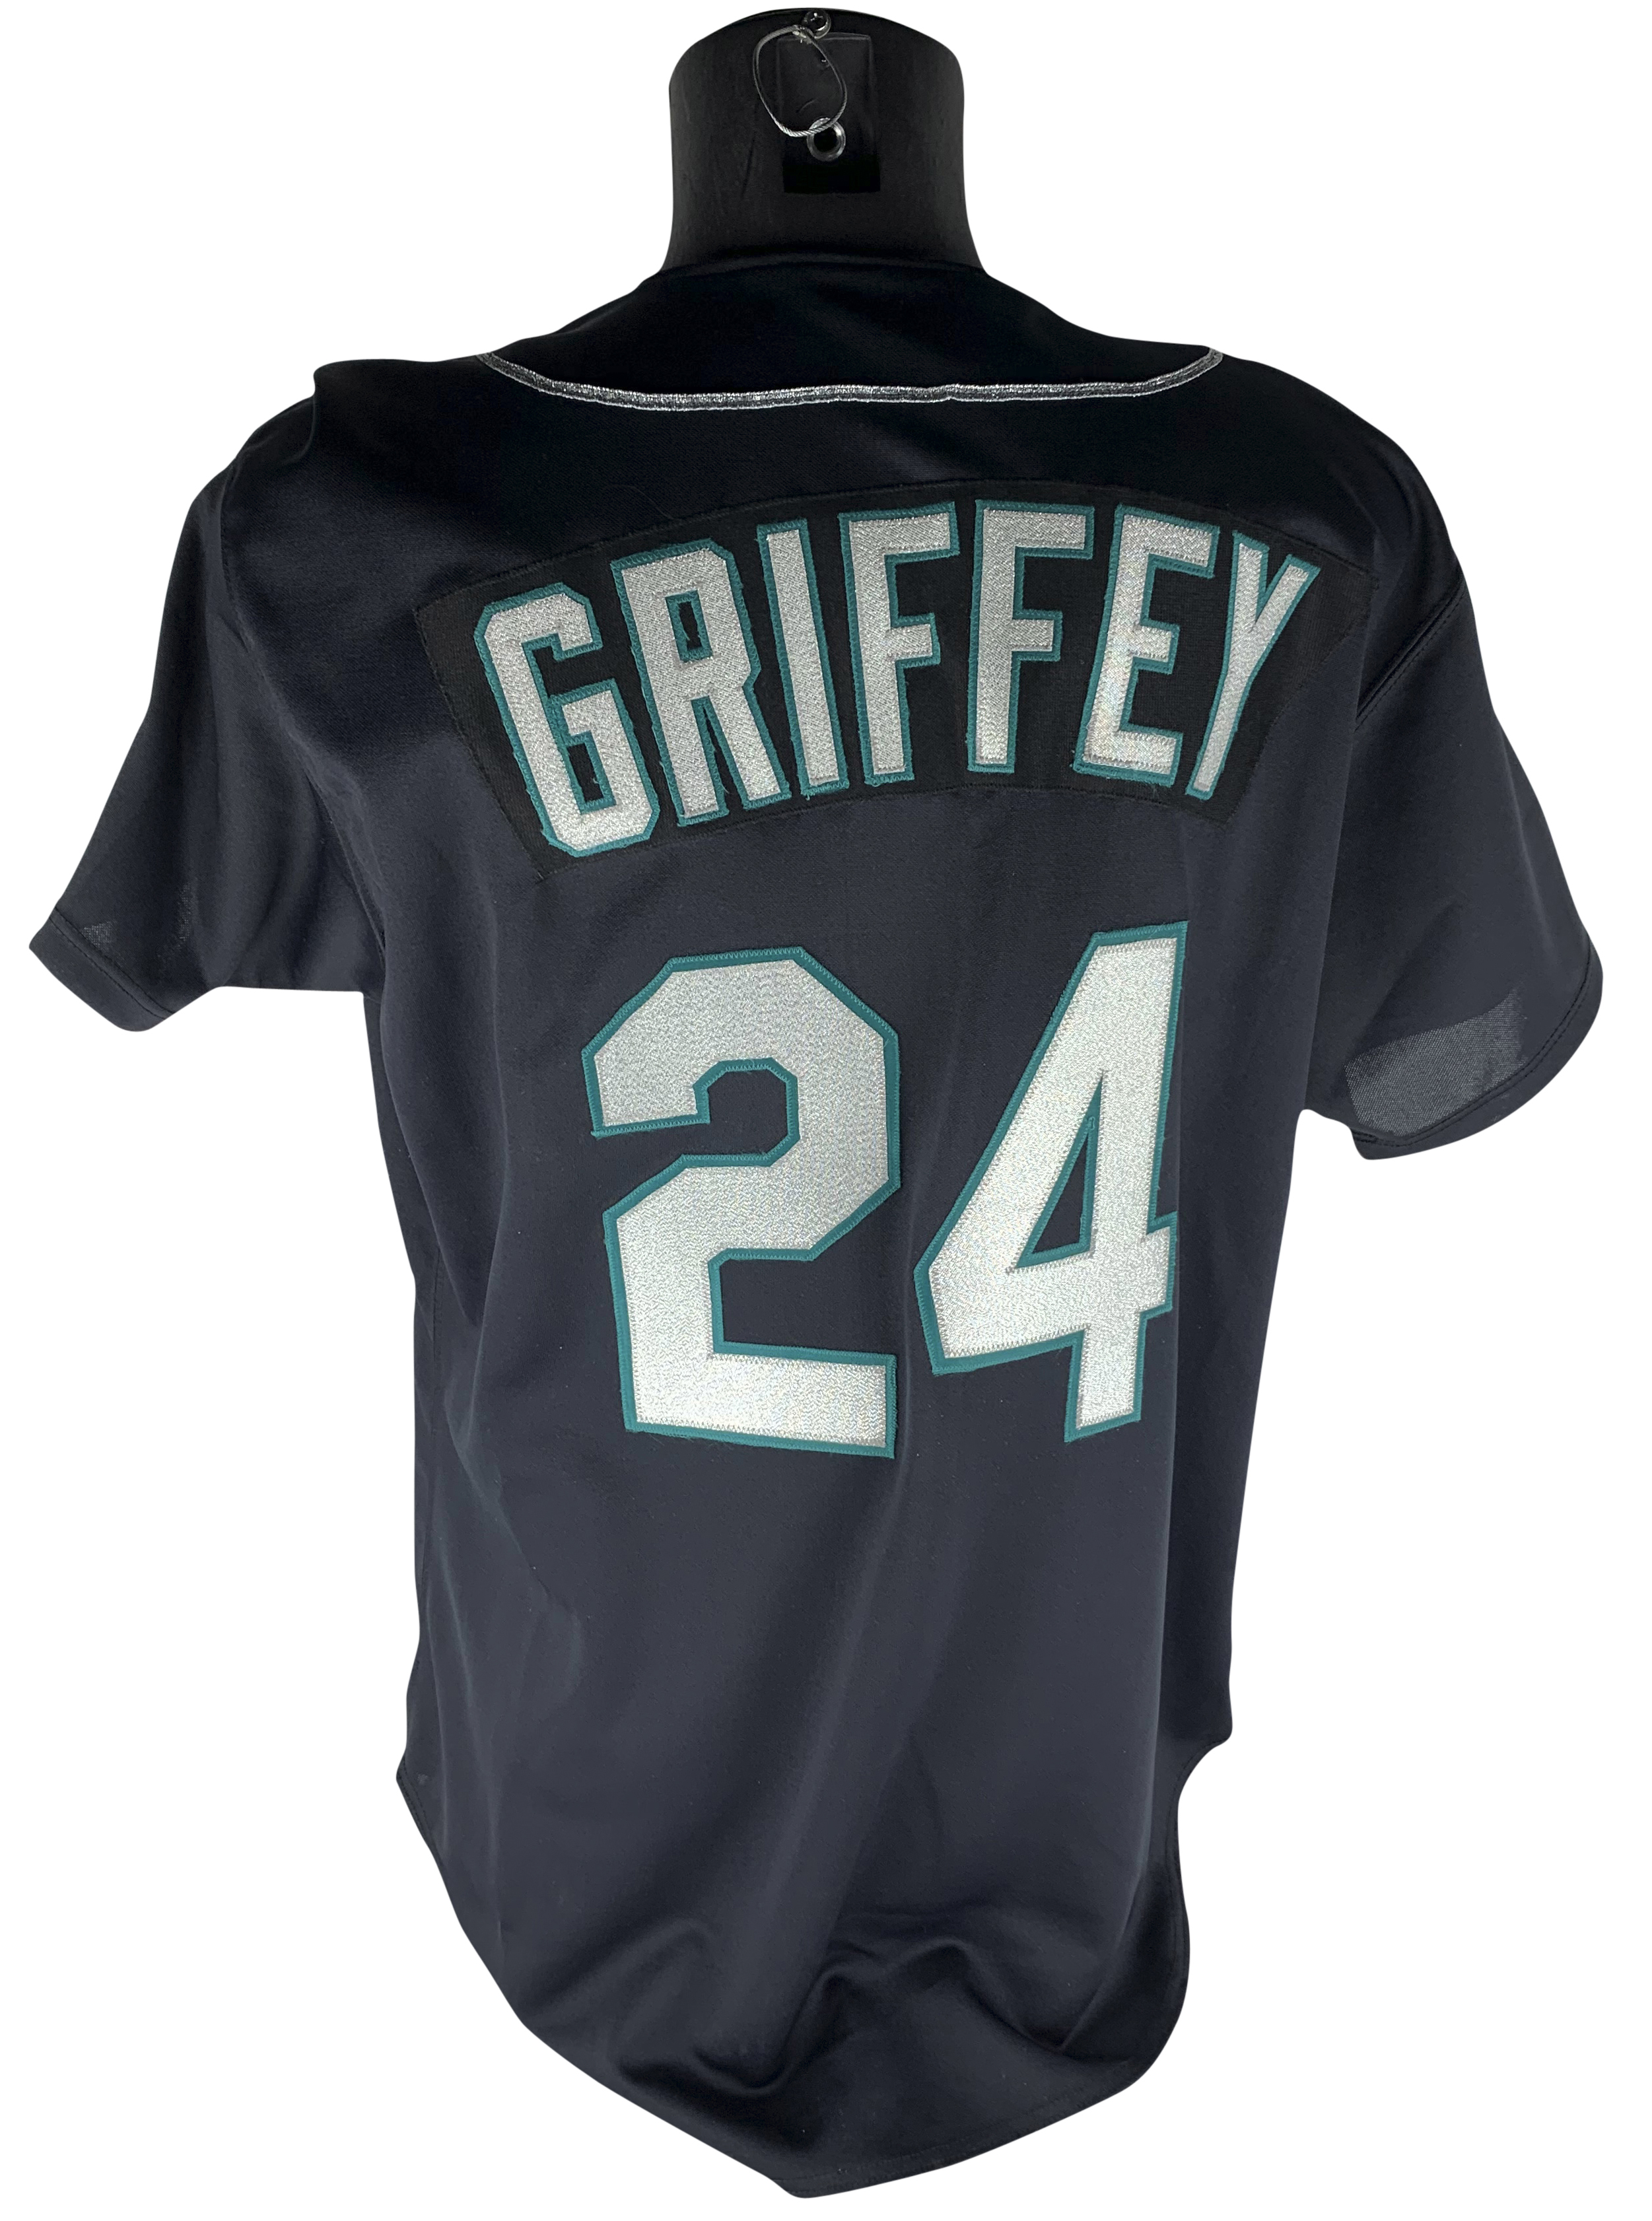 Lot Detail - Ken Griffey Jr. 2009 Seattle Mariners Game Used & Autographed  Road Jersey - PHOTO MATCHED to 6 Games! (Meigray/Miedema/Player LOA)